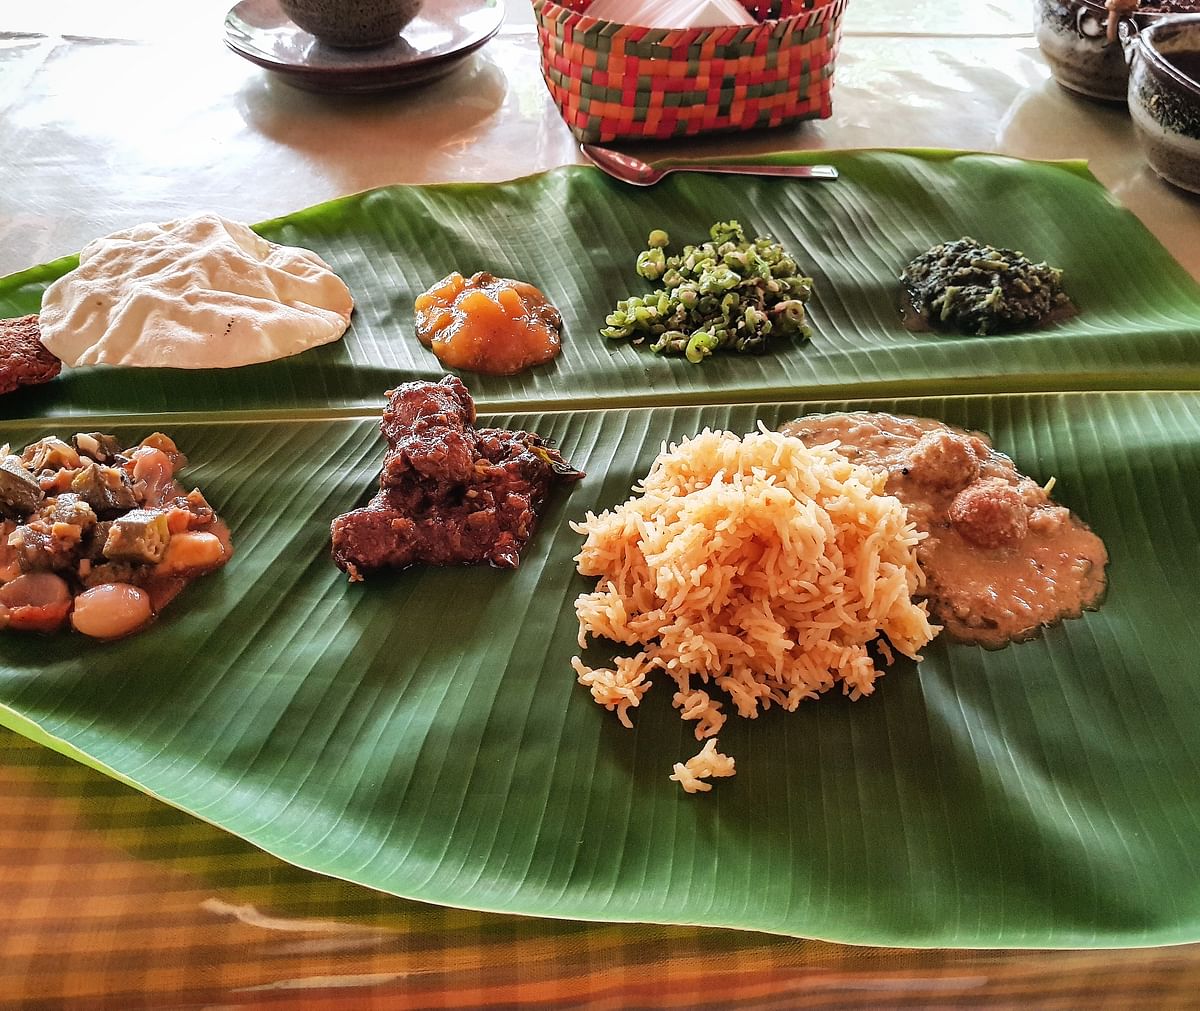 The Bangala’s banana leaf lunch is a big draw and has stayed consistent to Chettinad traditions.